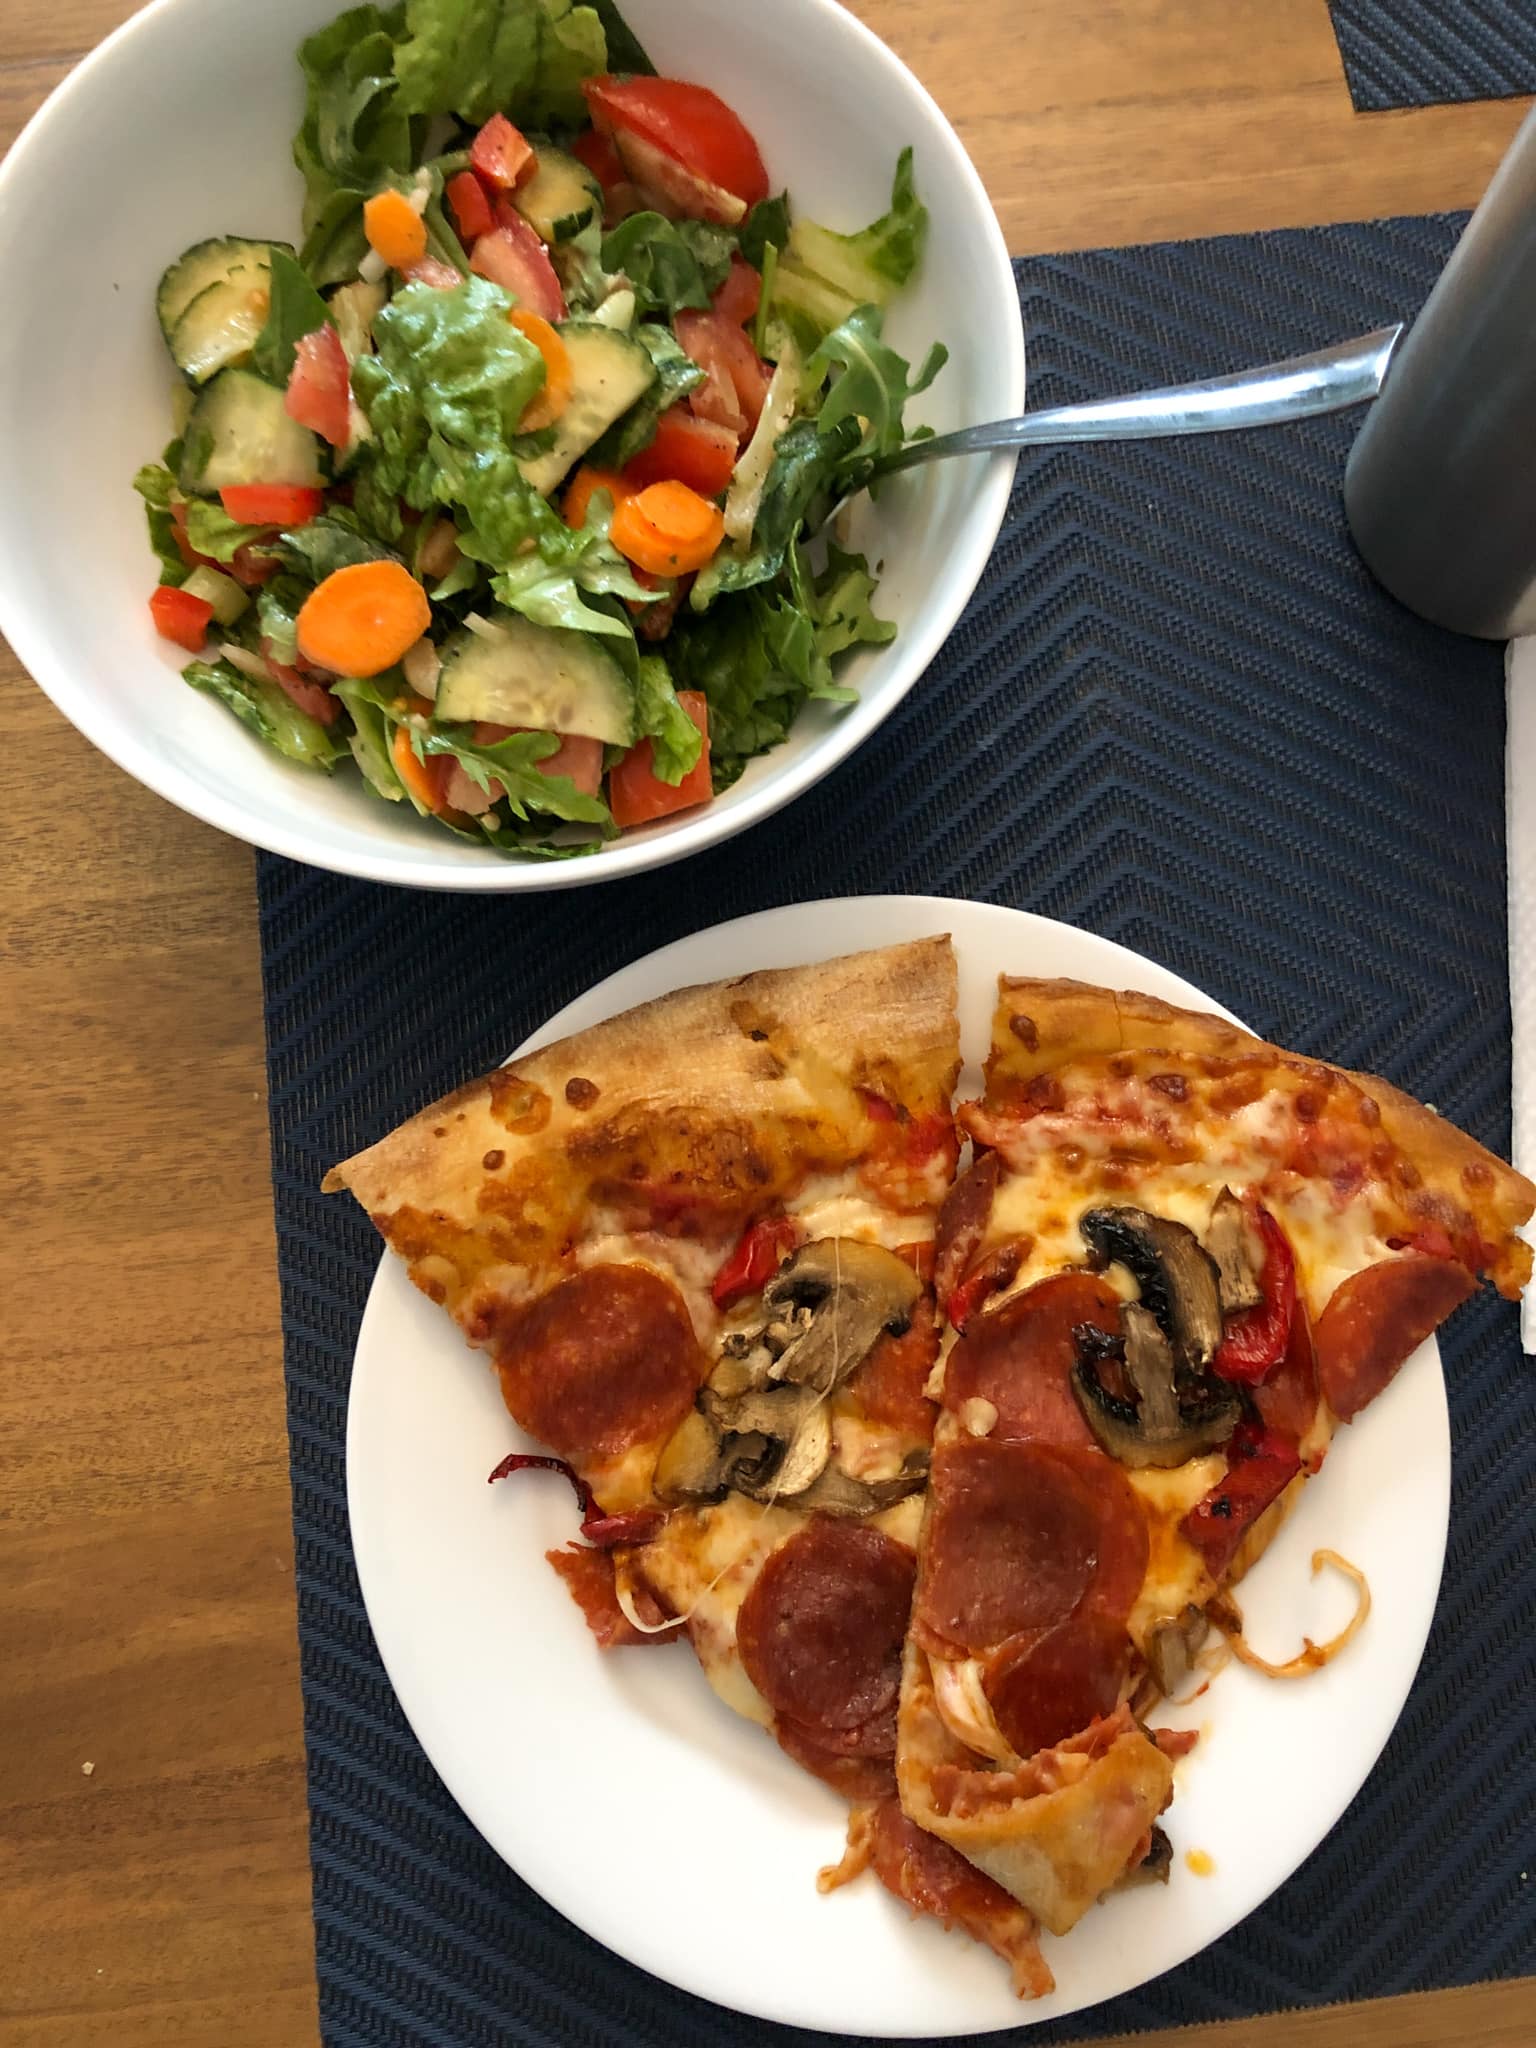 pizza on a plate and salad in a bowl.